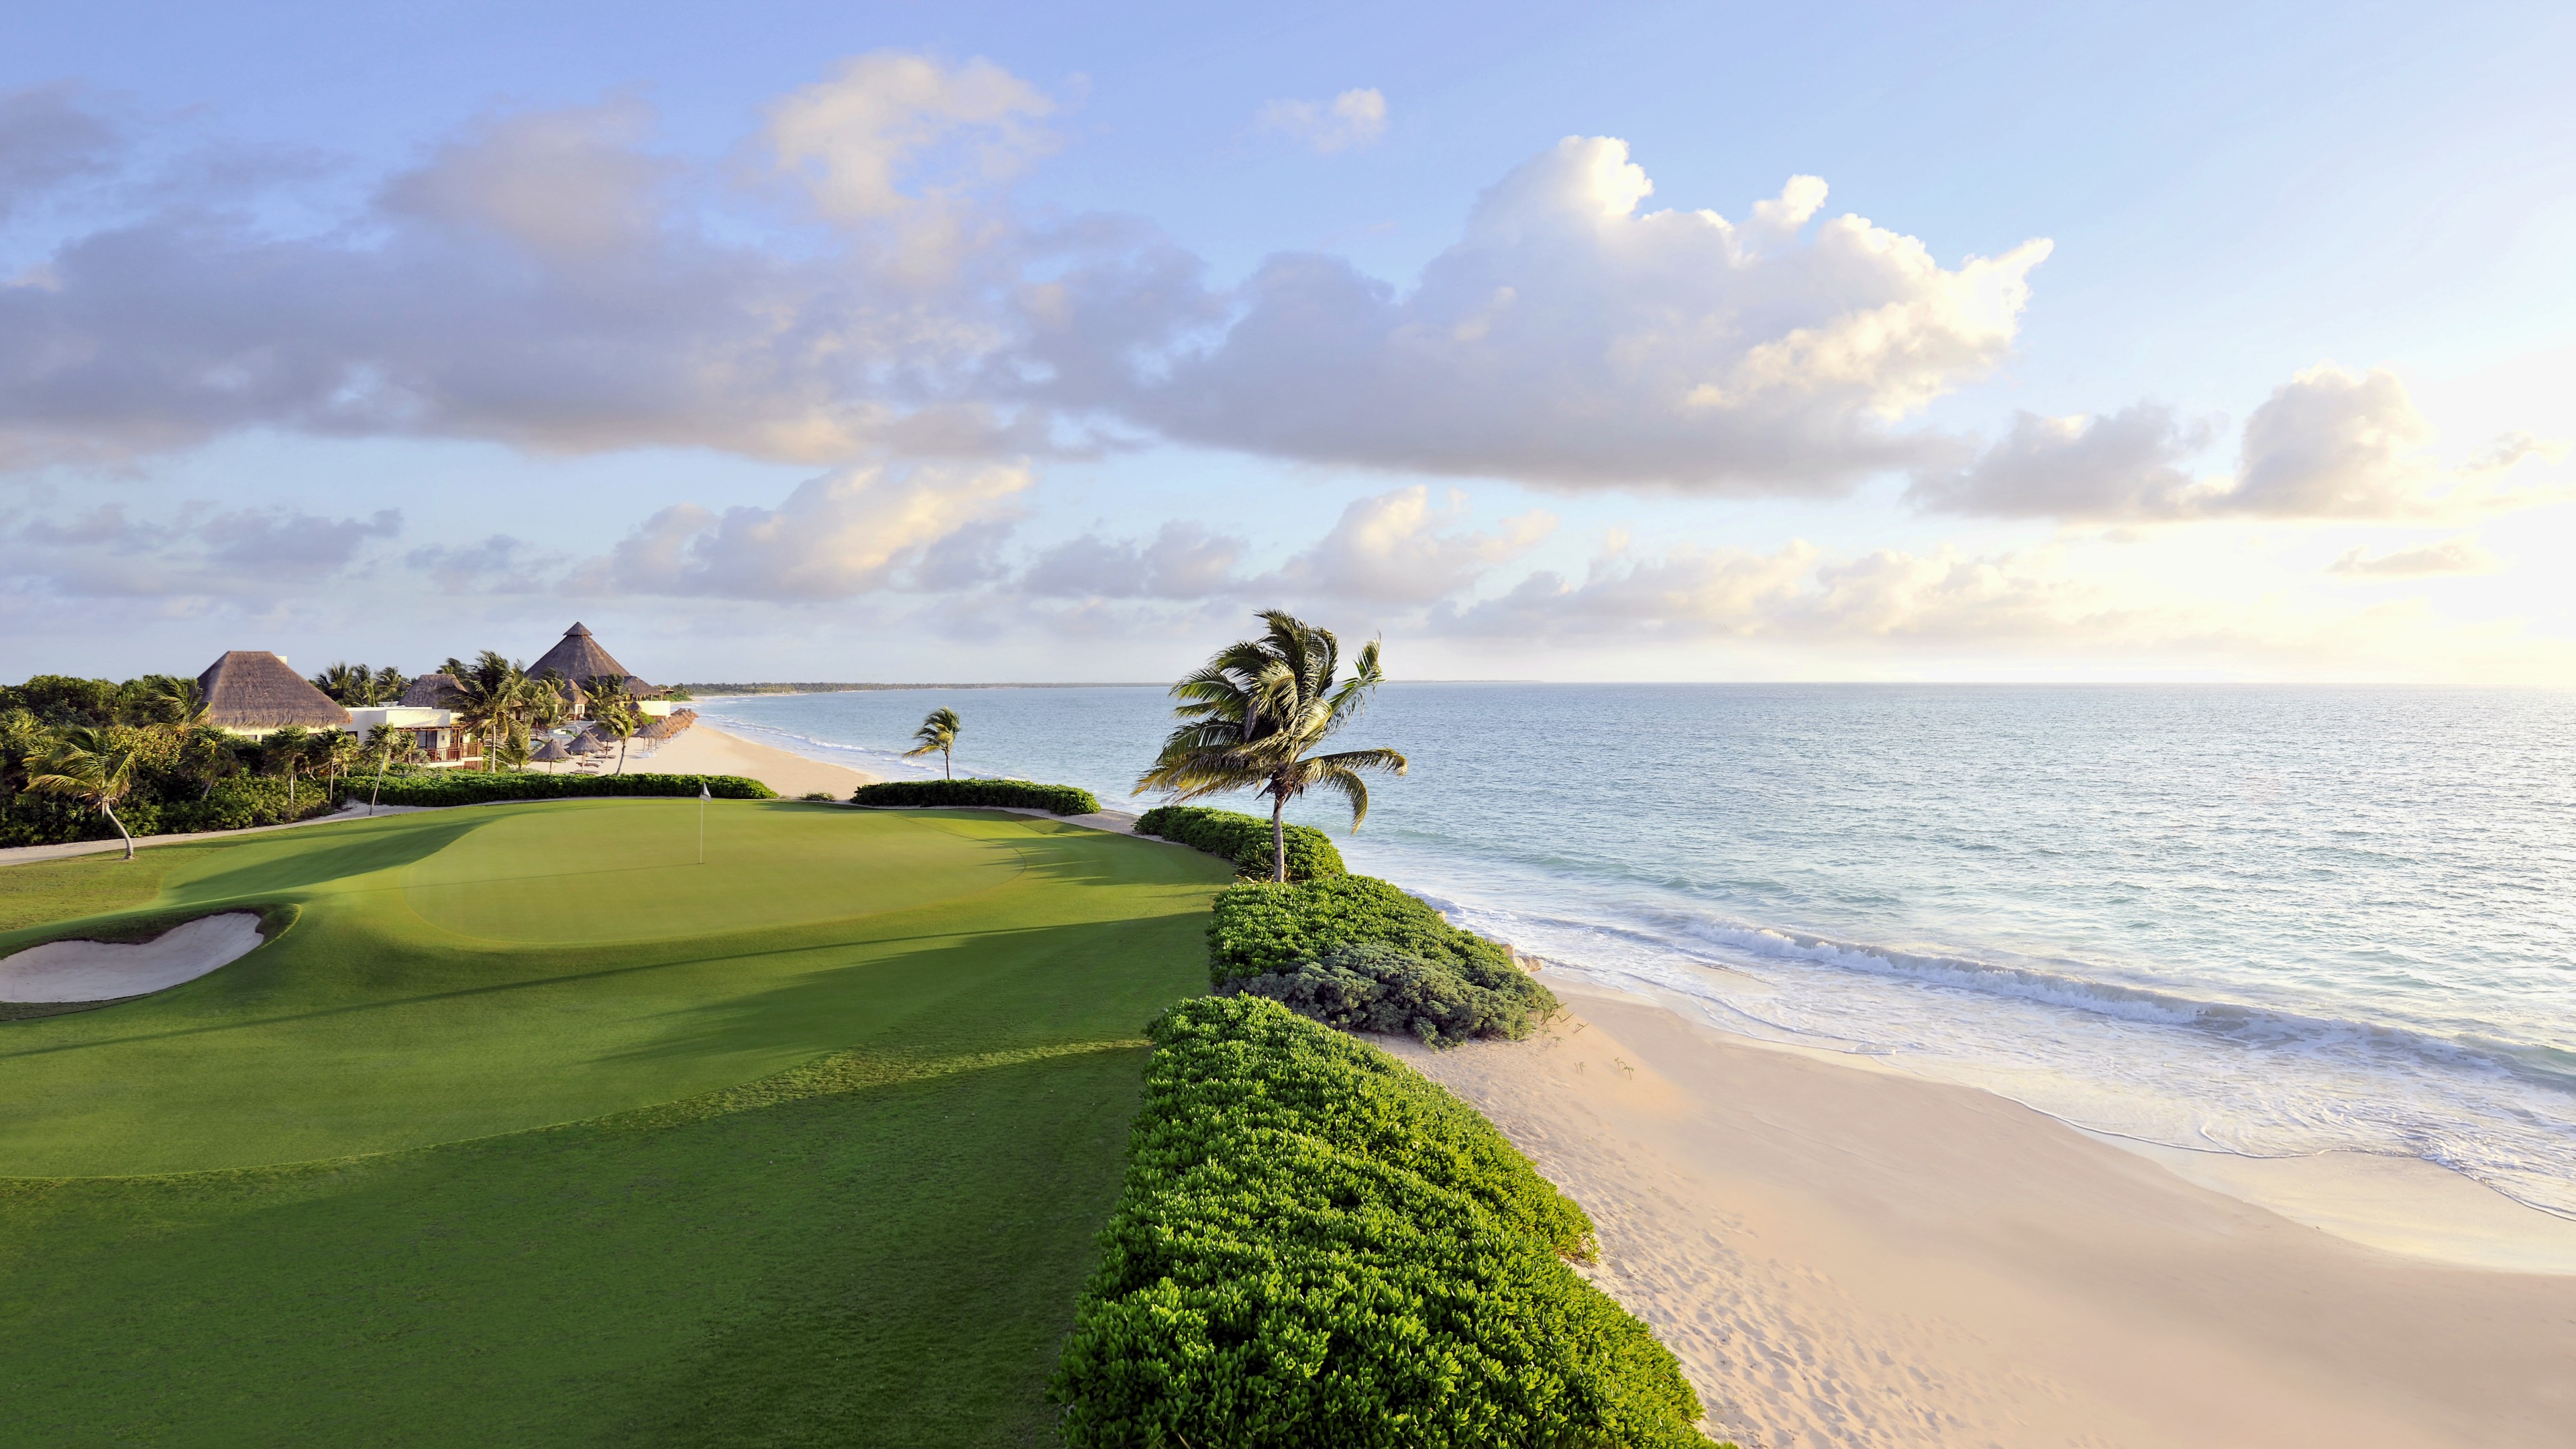 Nature Landscape Water Sea Mexico Golf Course Palm Trees Sand Grass House Field Clouds Horizon Sunli 3840x2160